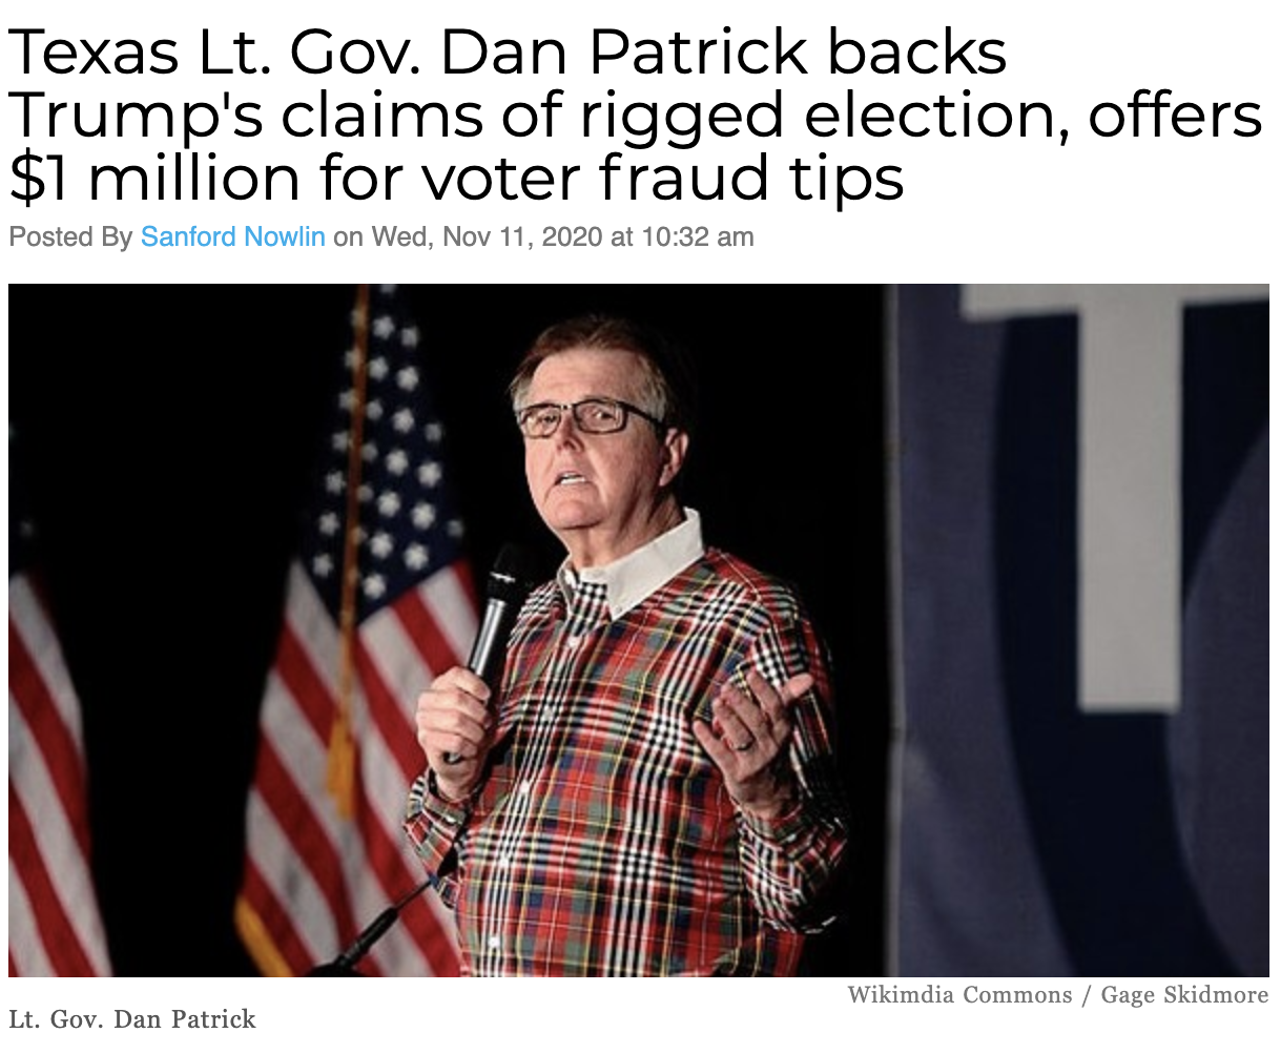 In a news release, the Republican Lt. Gov. Dan Patrick said he's prepared to offer up to $1 million to "incentivize, encourage and reward" people people who blow the whistle on voter fraud in the Lone Star State. Read more here.